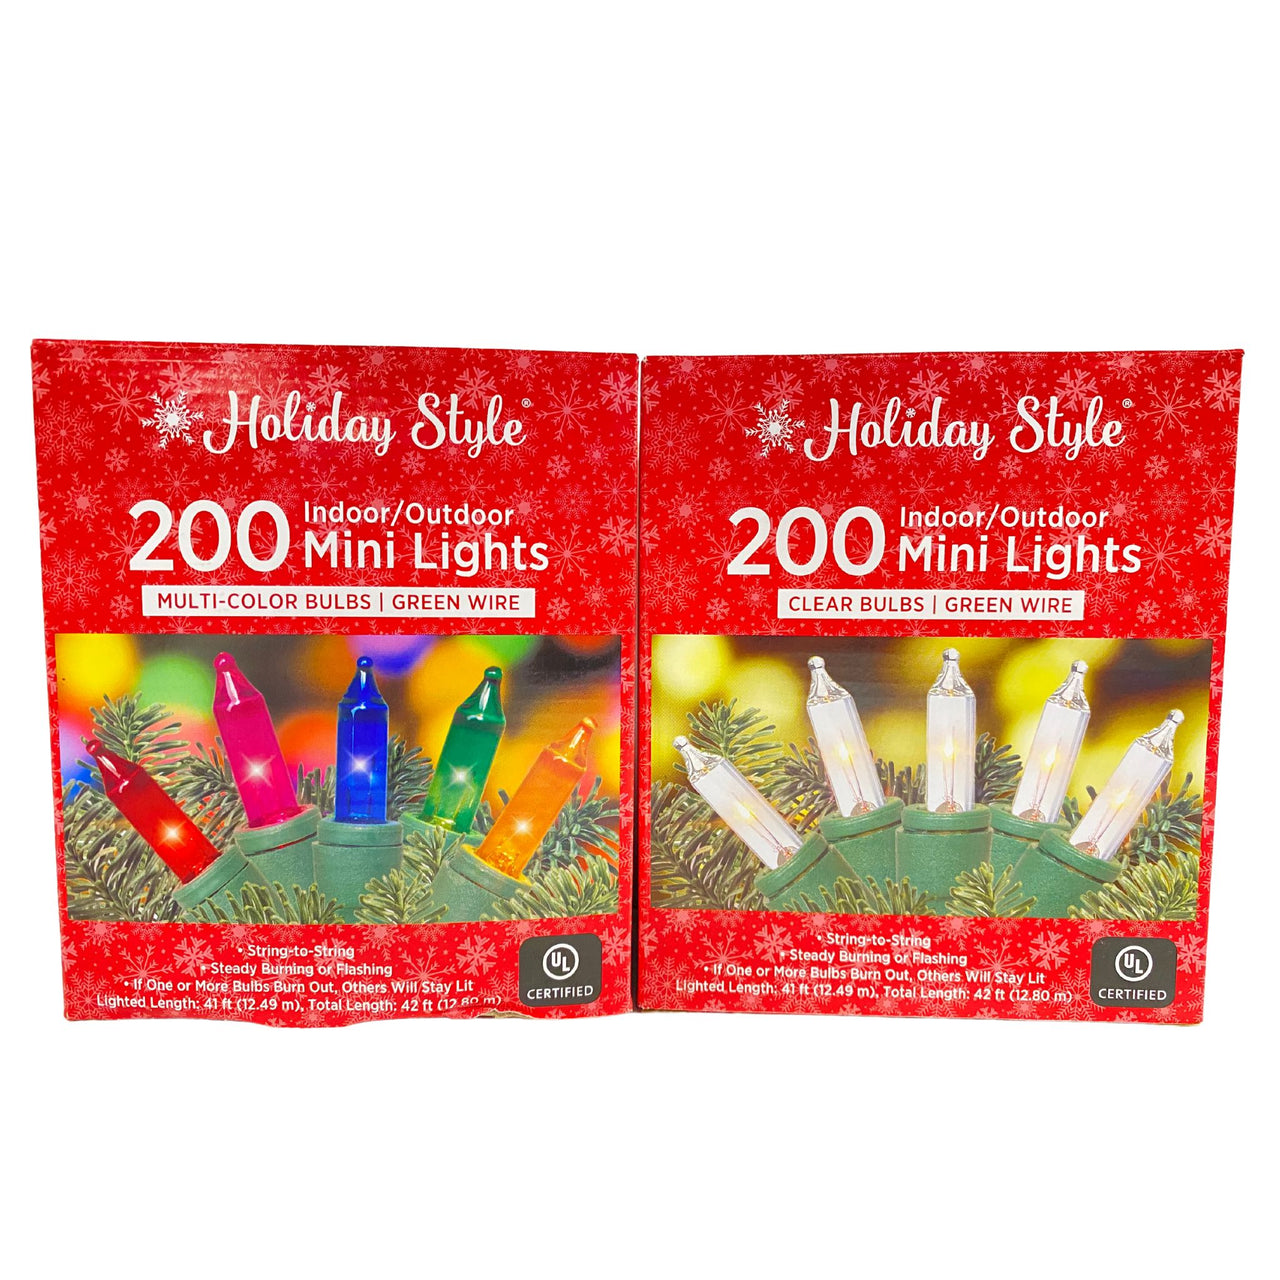 Holiday Style Indoor/Outdoor Mini Lights Clear & Multi Color Bulbs 